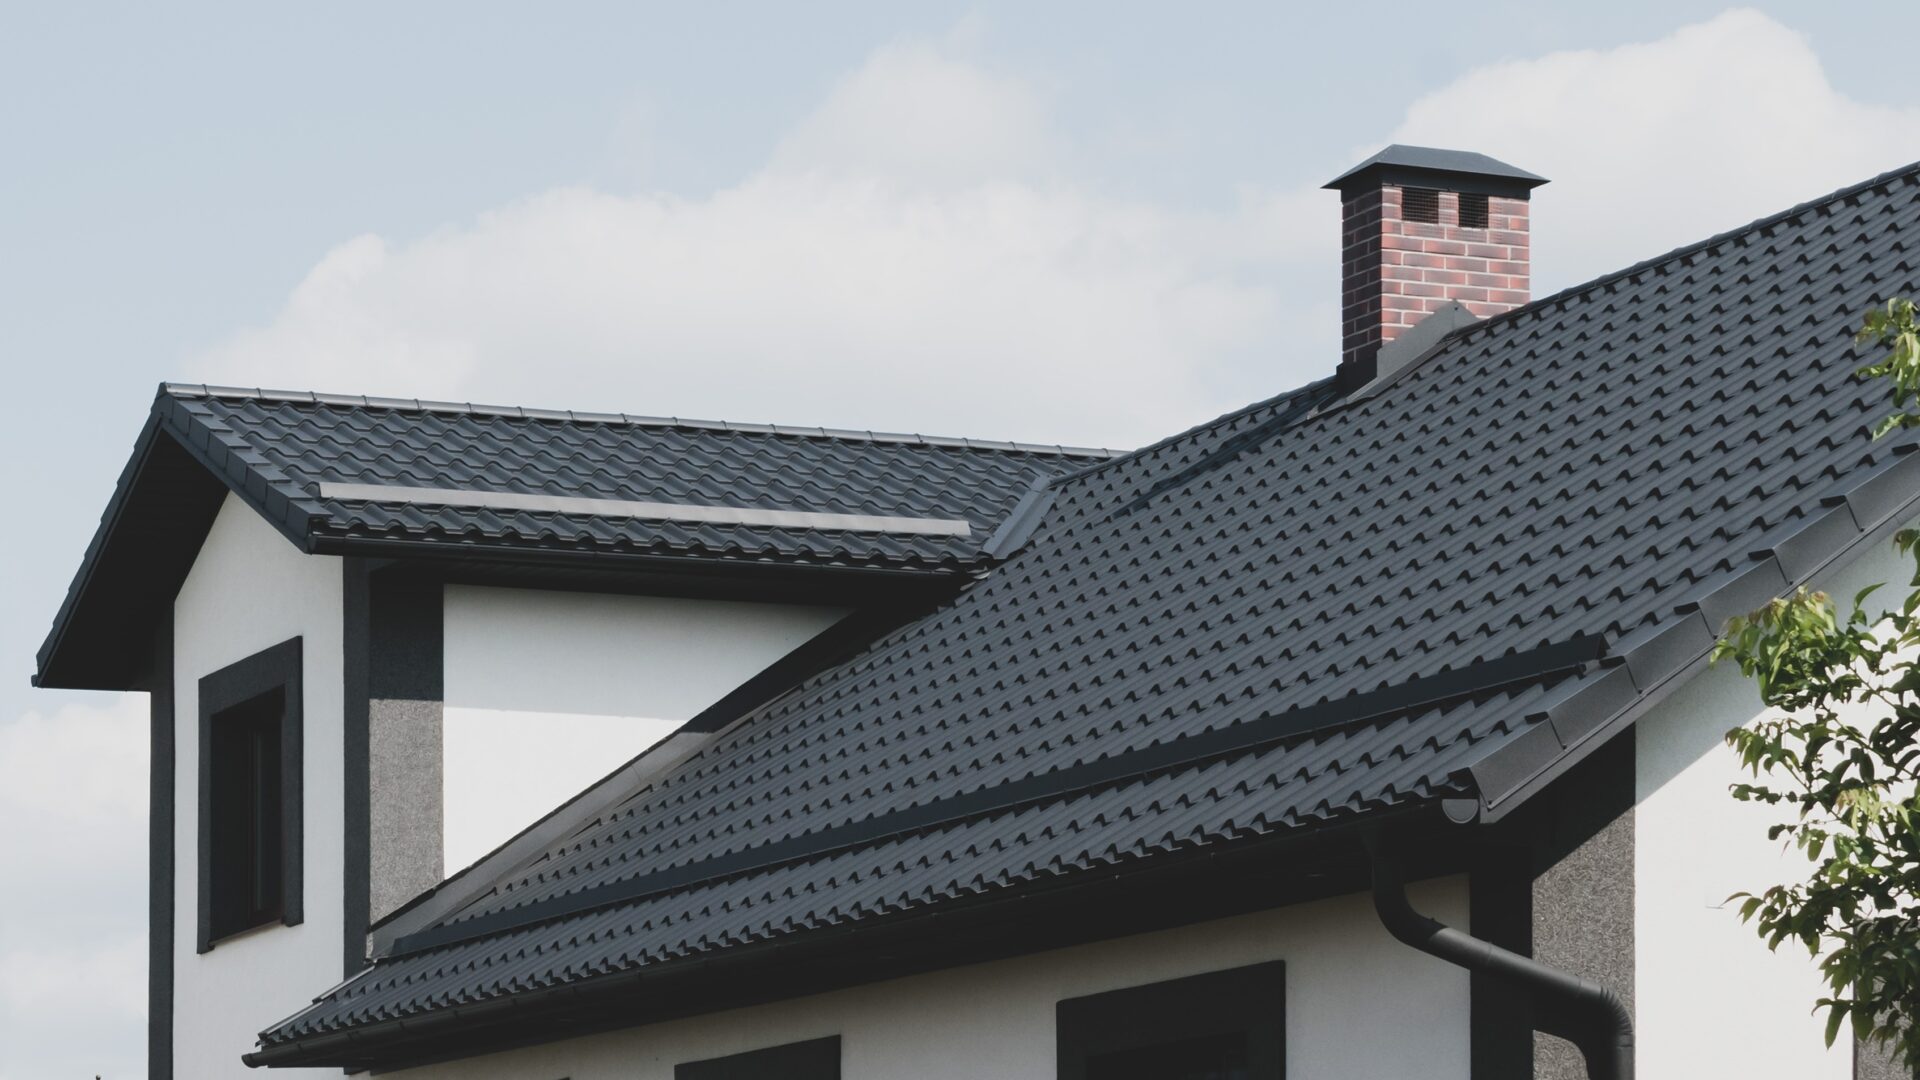 A black metal roof on a white home with black trim